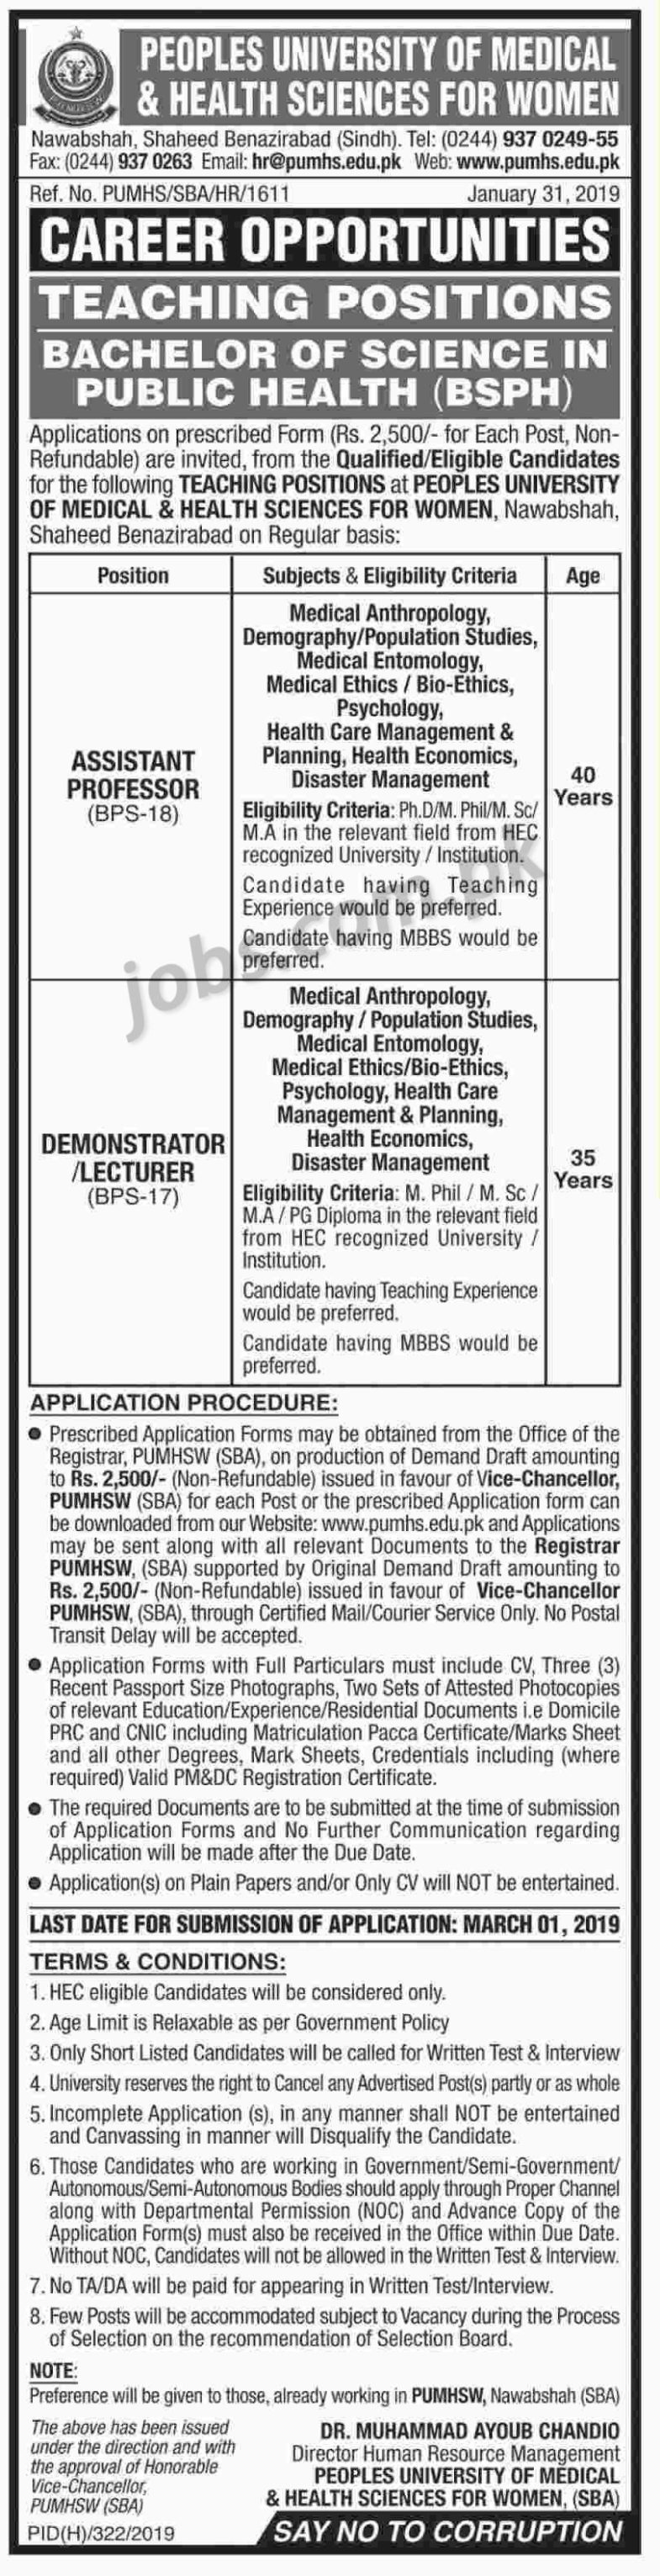 Peoples University of Medical & Health Sciences for Women Jobs 2019 for Teaching Faculty